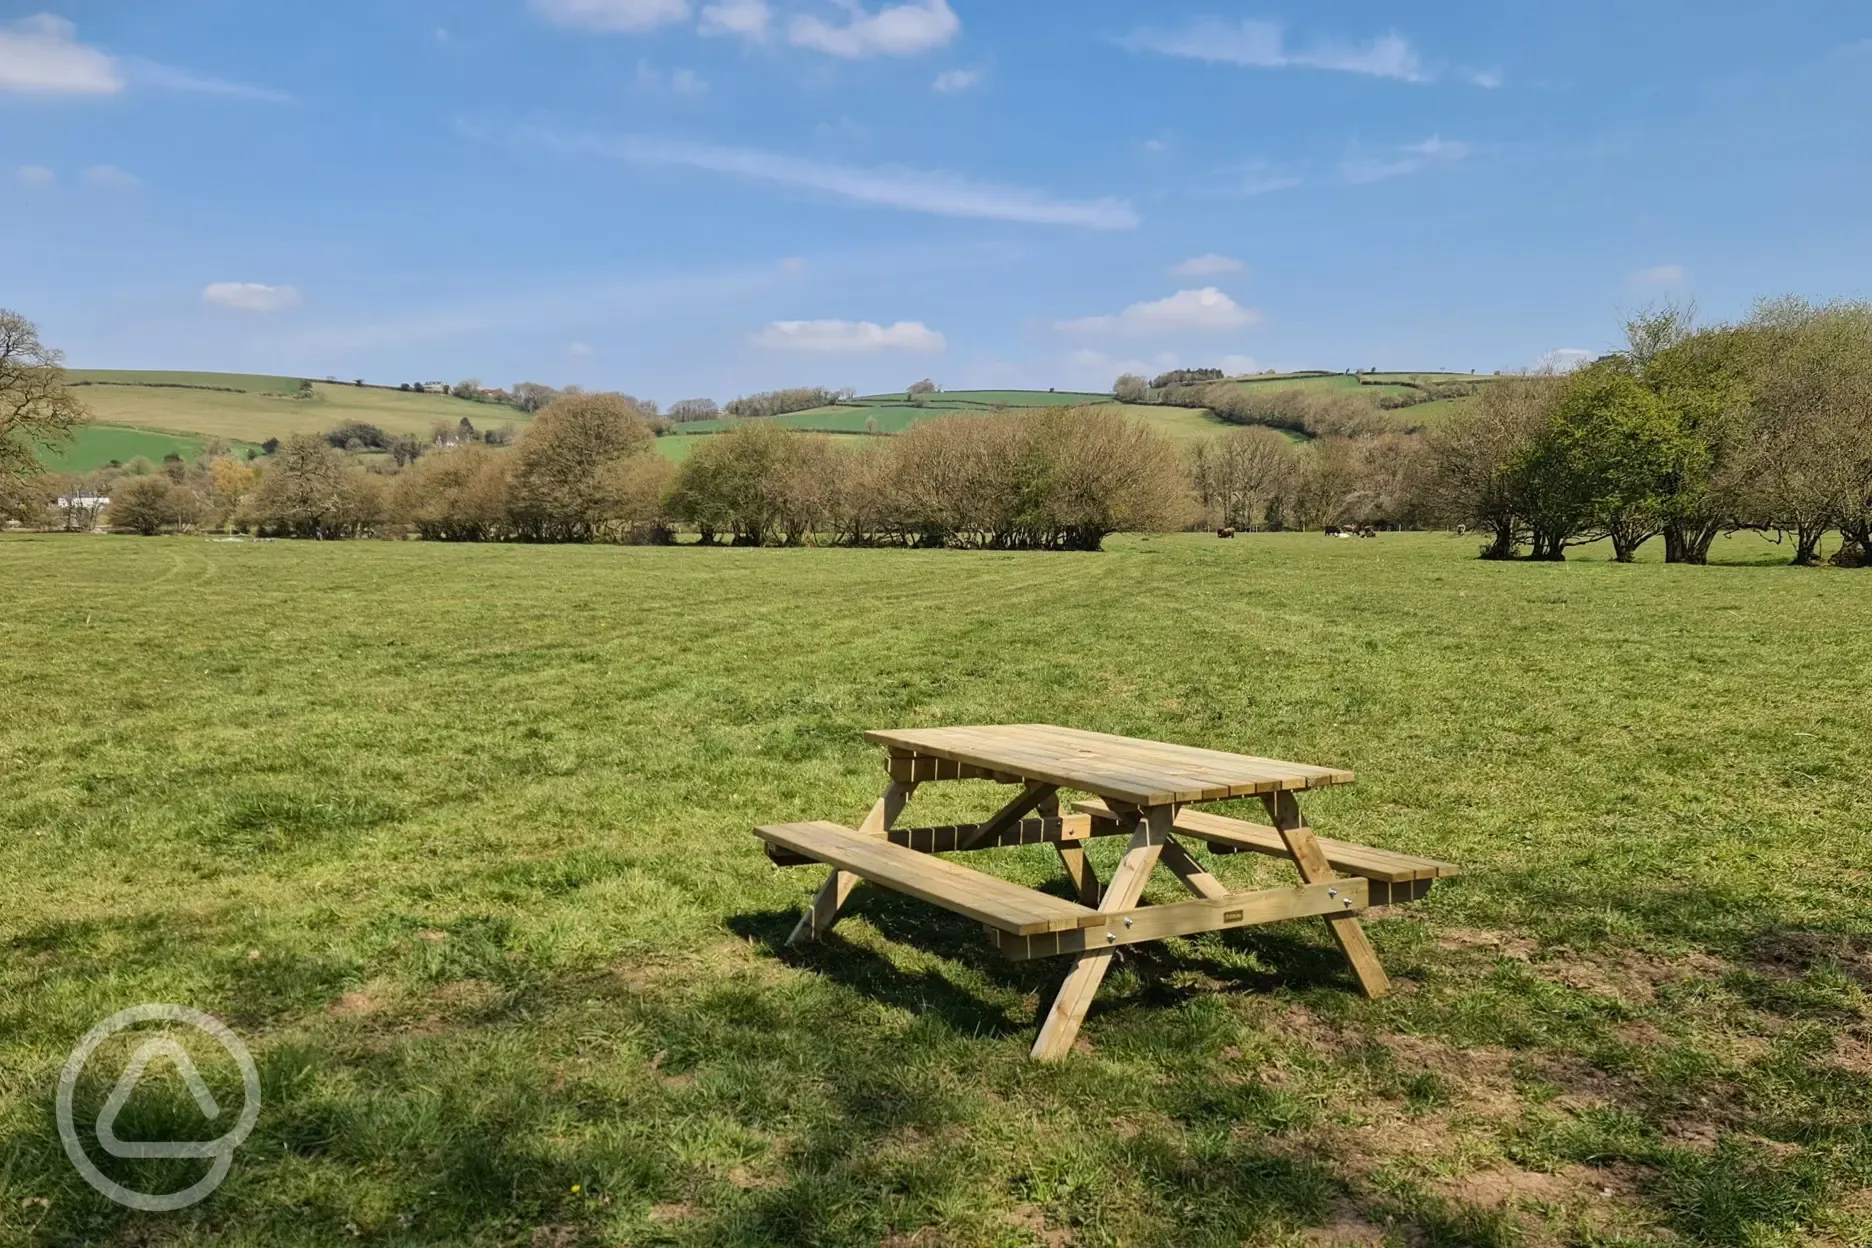 Picnic benches around the meadow